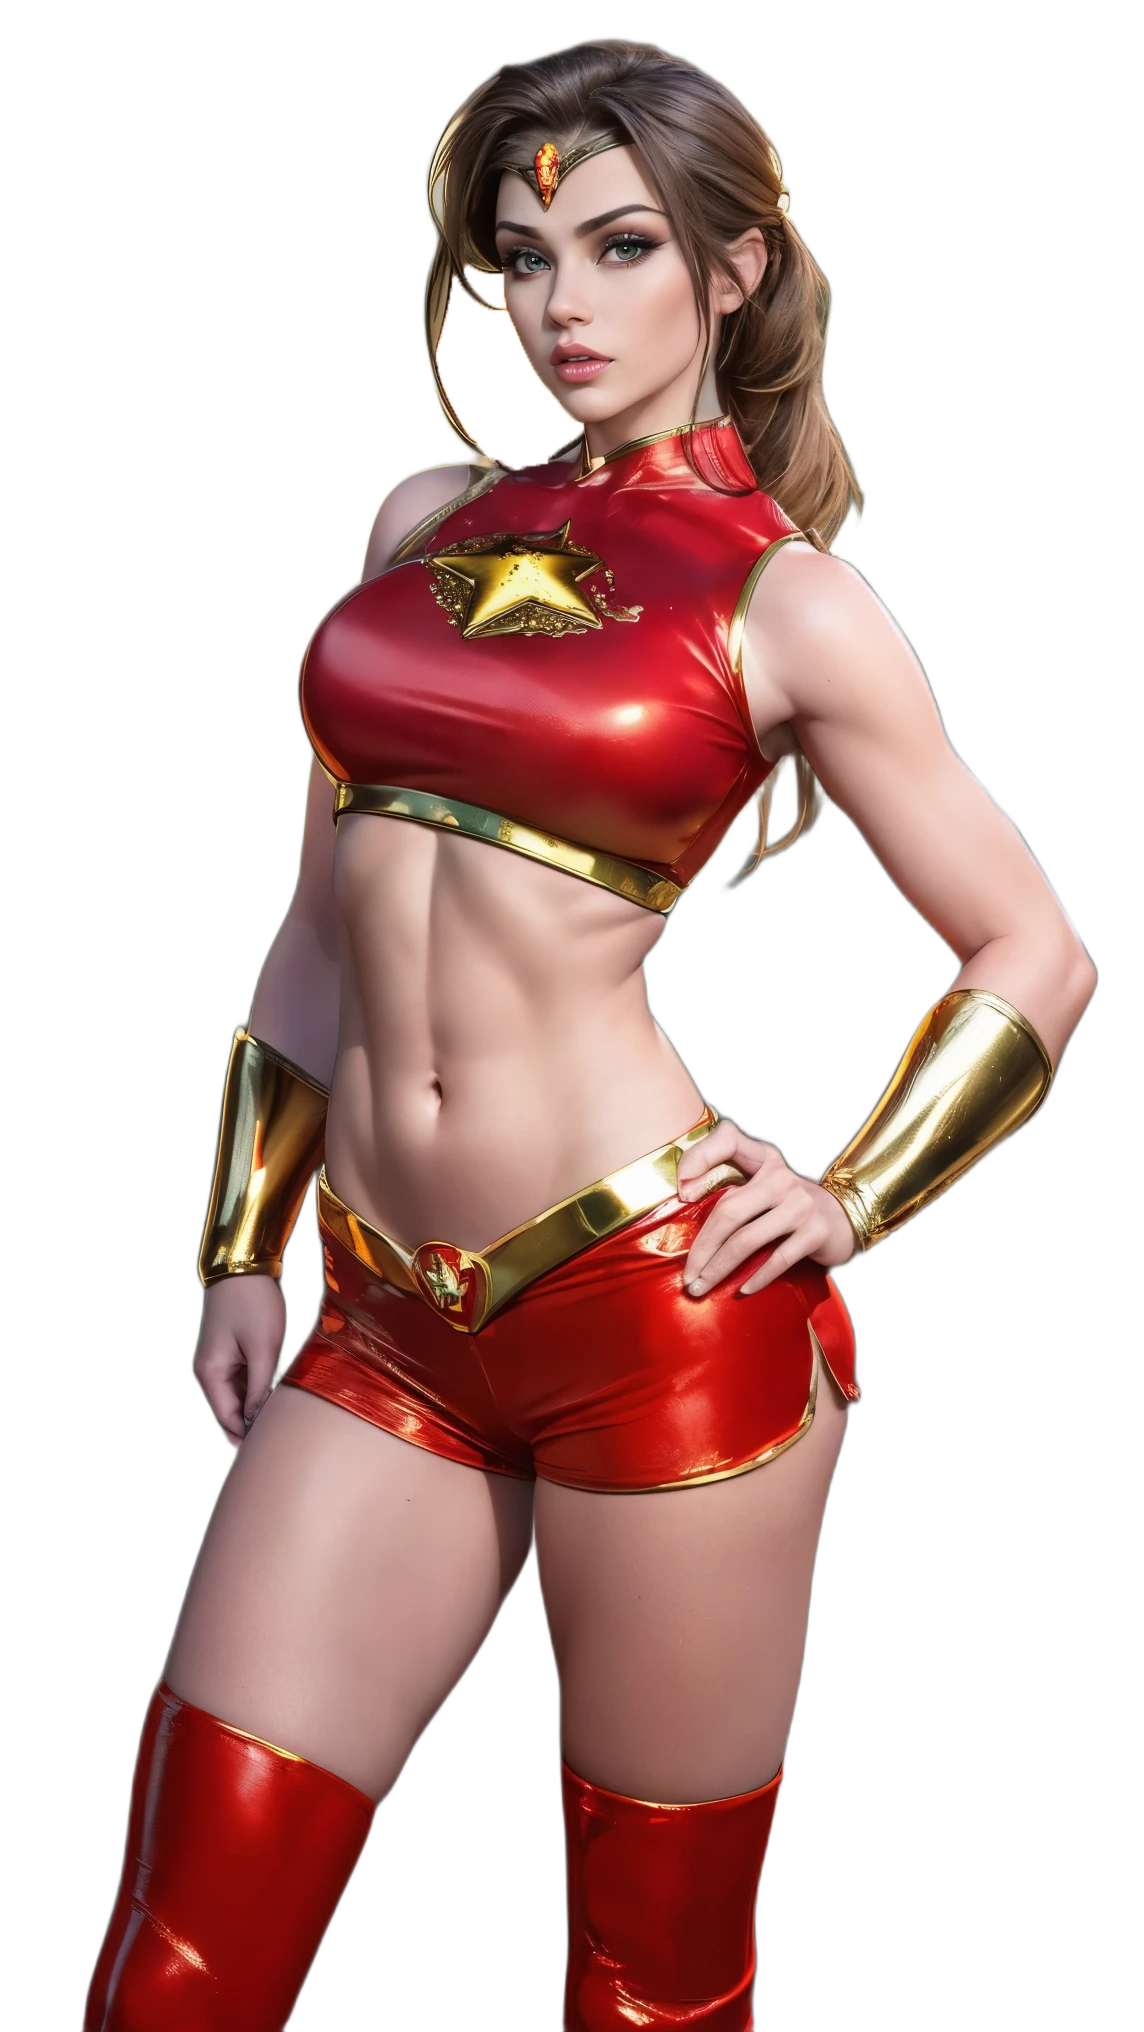 Fantasy,Pure Love,Female,OC,Role-Play,Submissive,Venus Star is a superheroine and a super model, her real name is Jasmine Williams,  She is an OC superheroine.

Jasmine Williams is a supermodel living in Lovelight City.